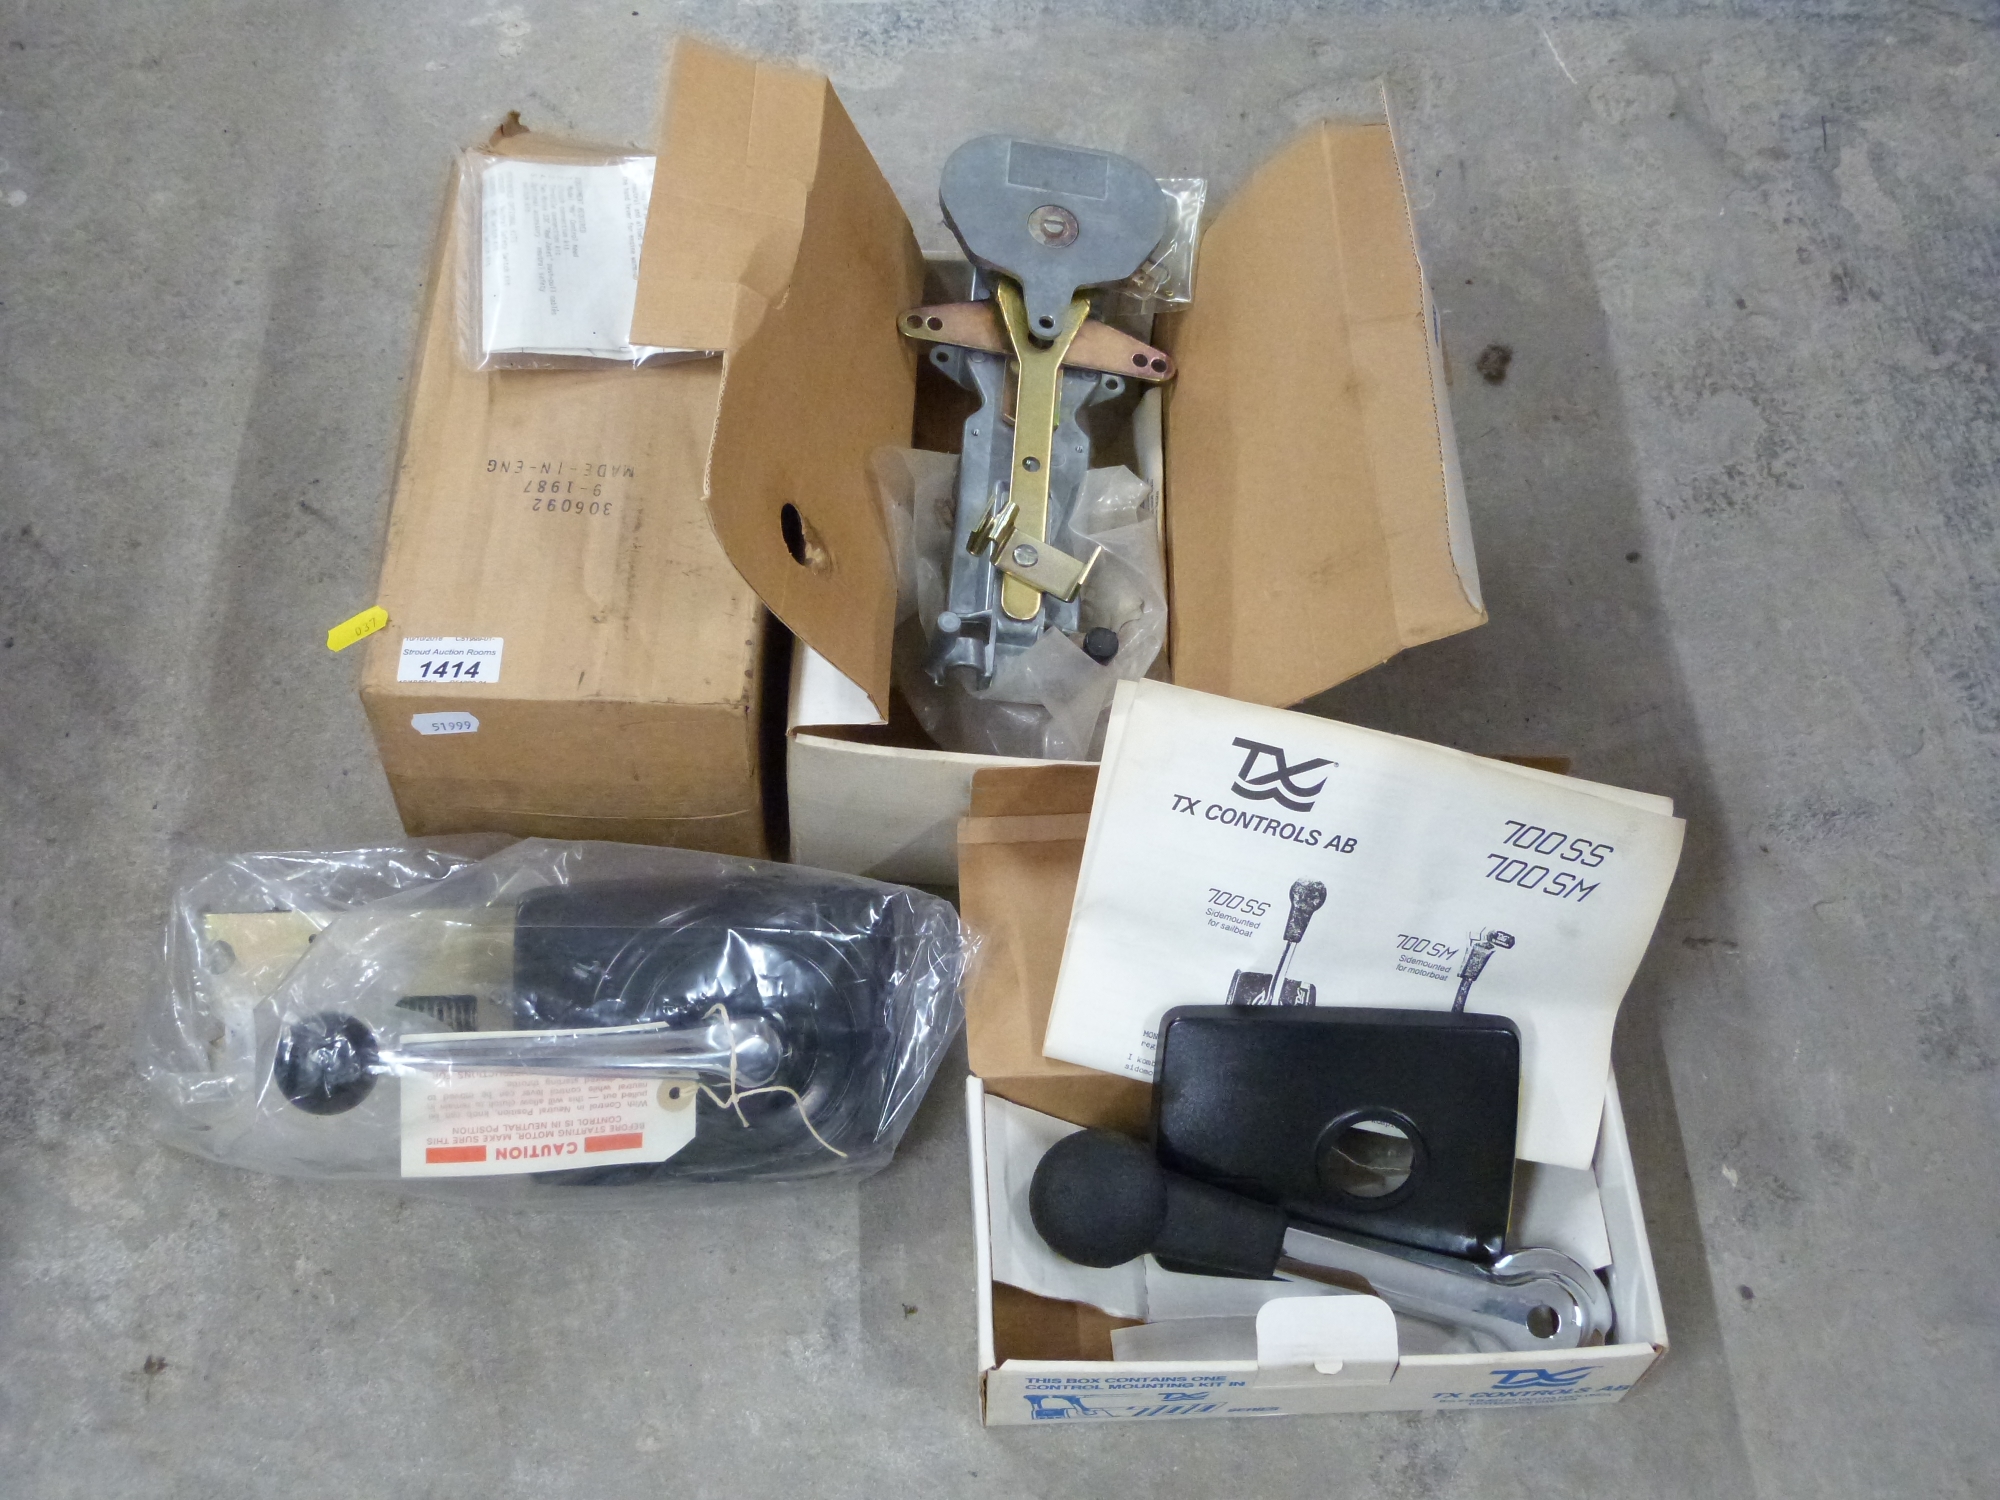 Morse MV boat engine control and two TX controls boxed items,